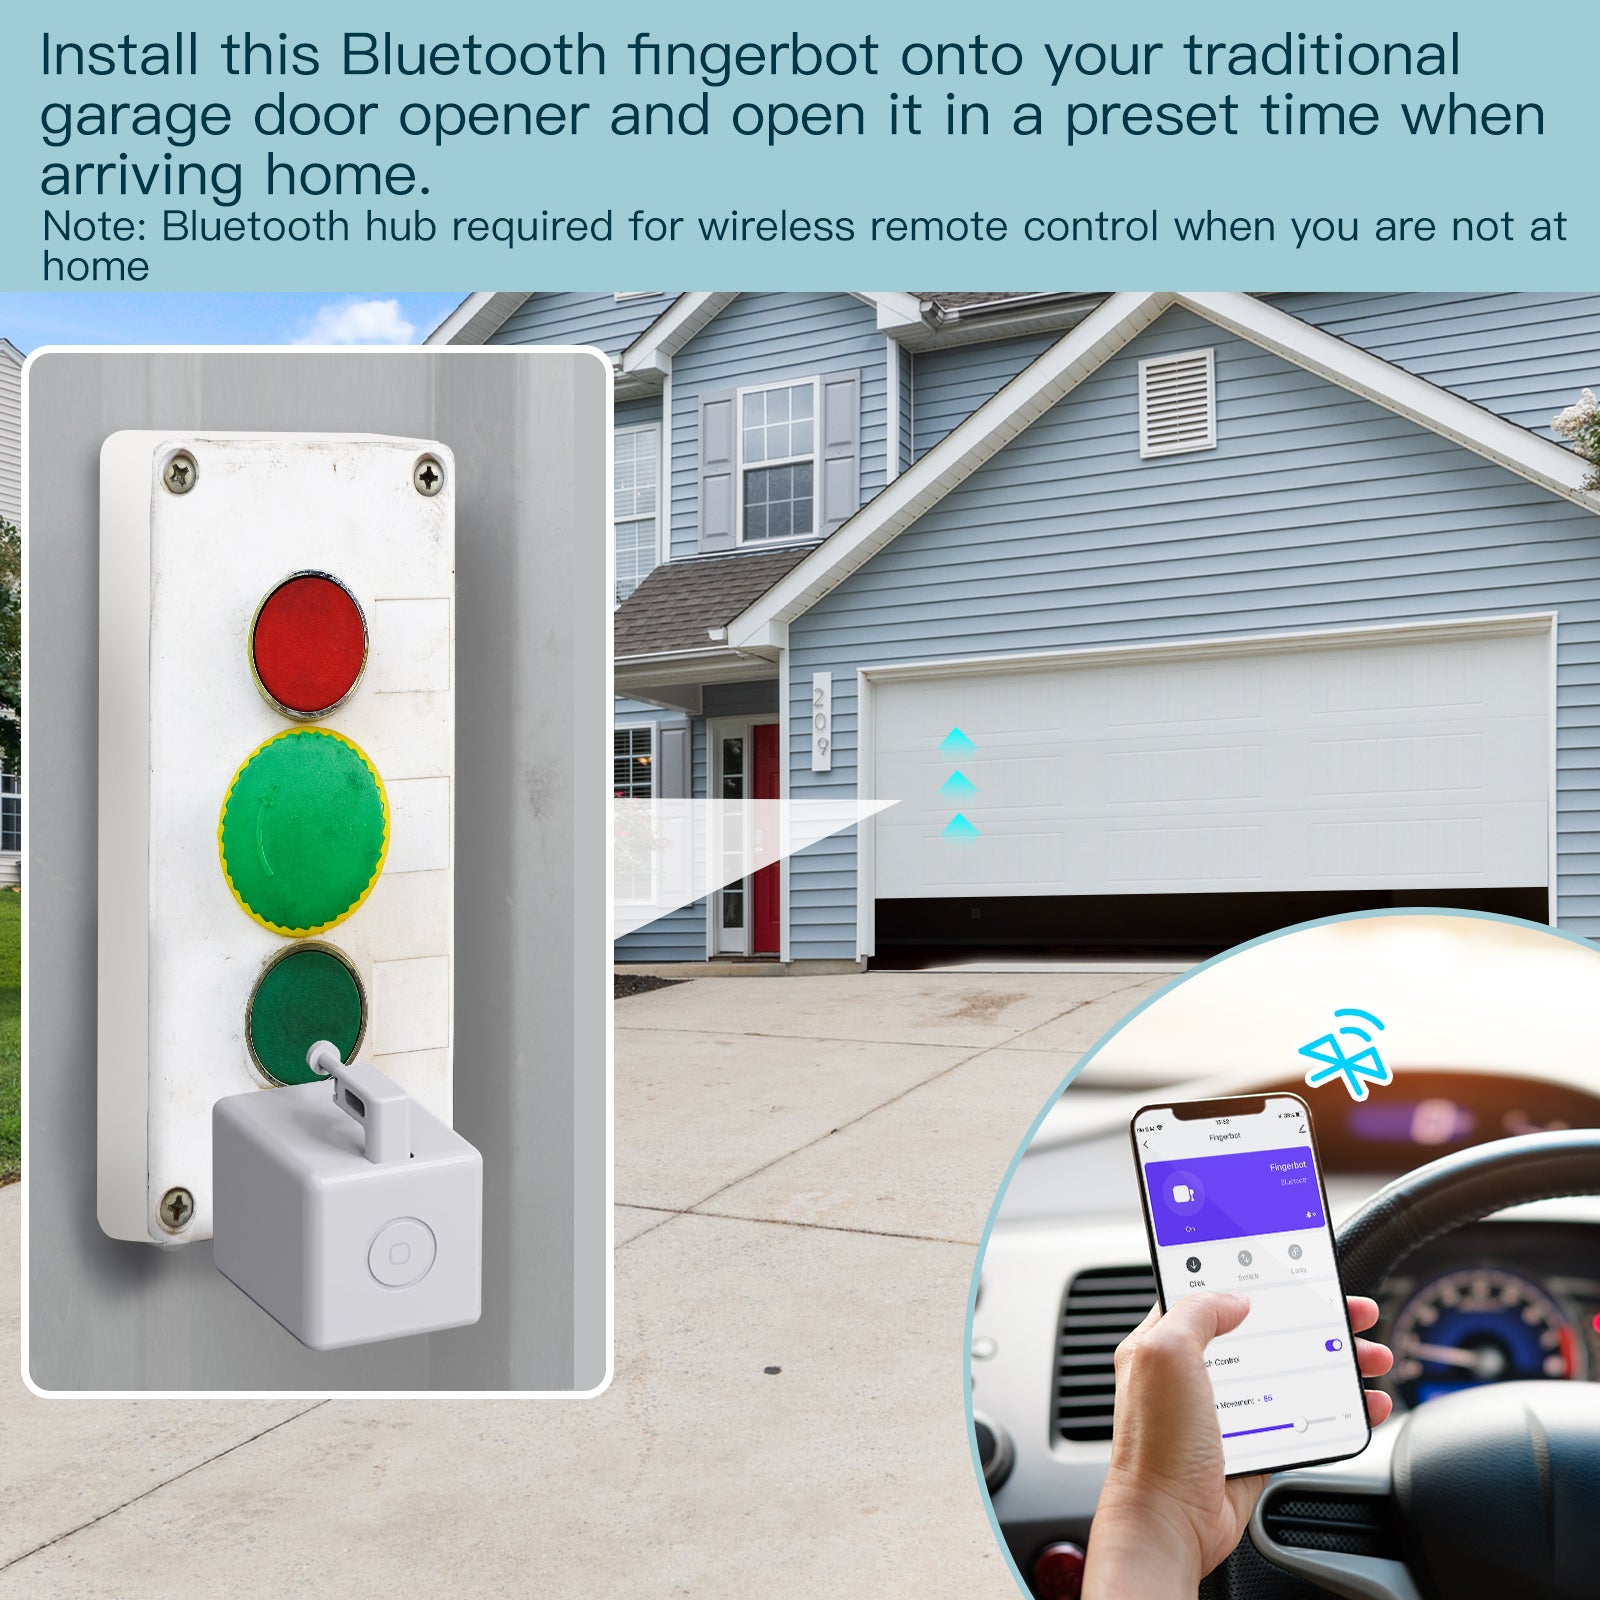 Note: Bluetooth hub required for wireless remote control when you are not at home